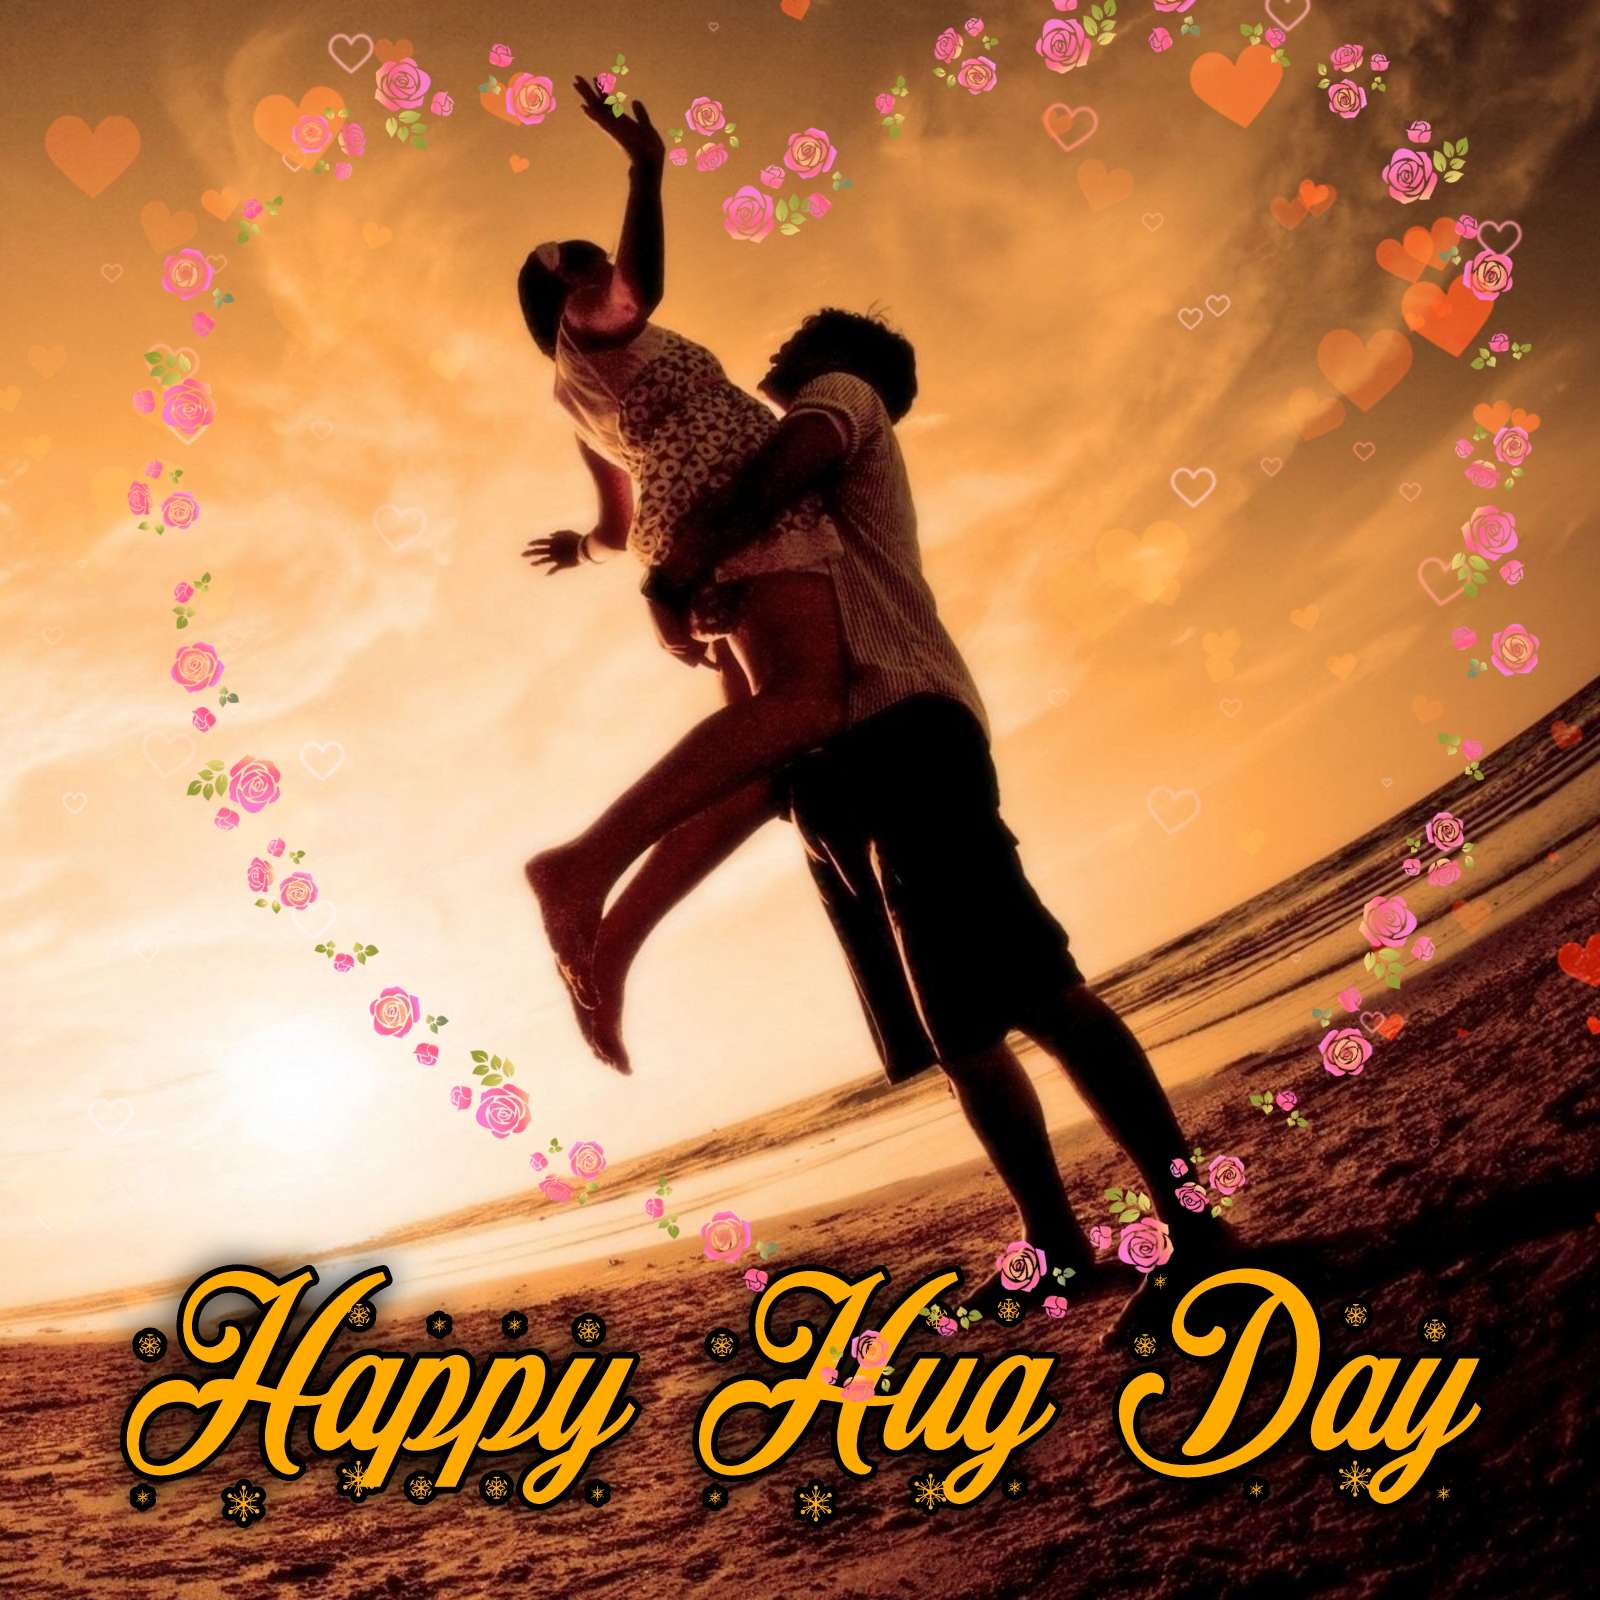 Happy Hug Day Pic 2022 Download